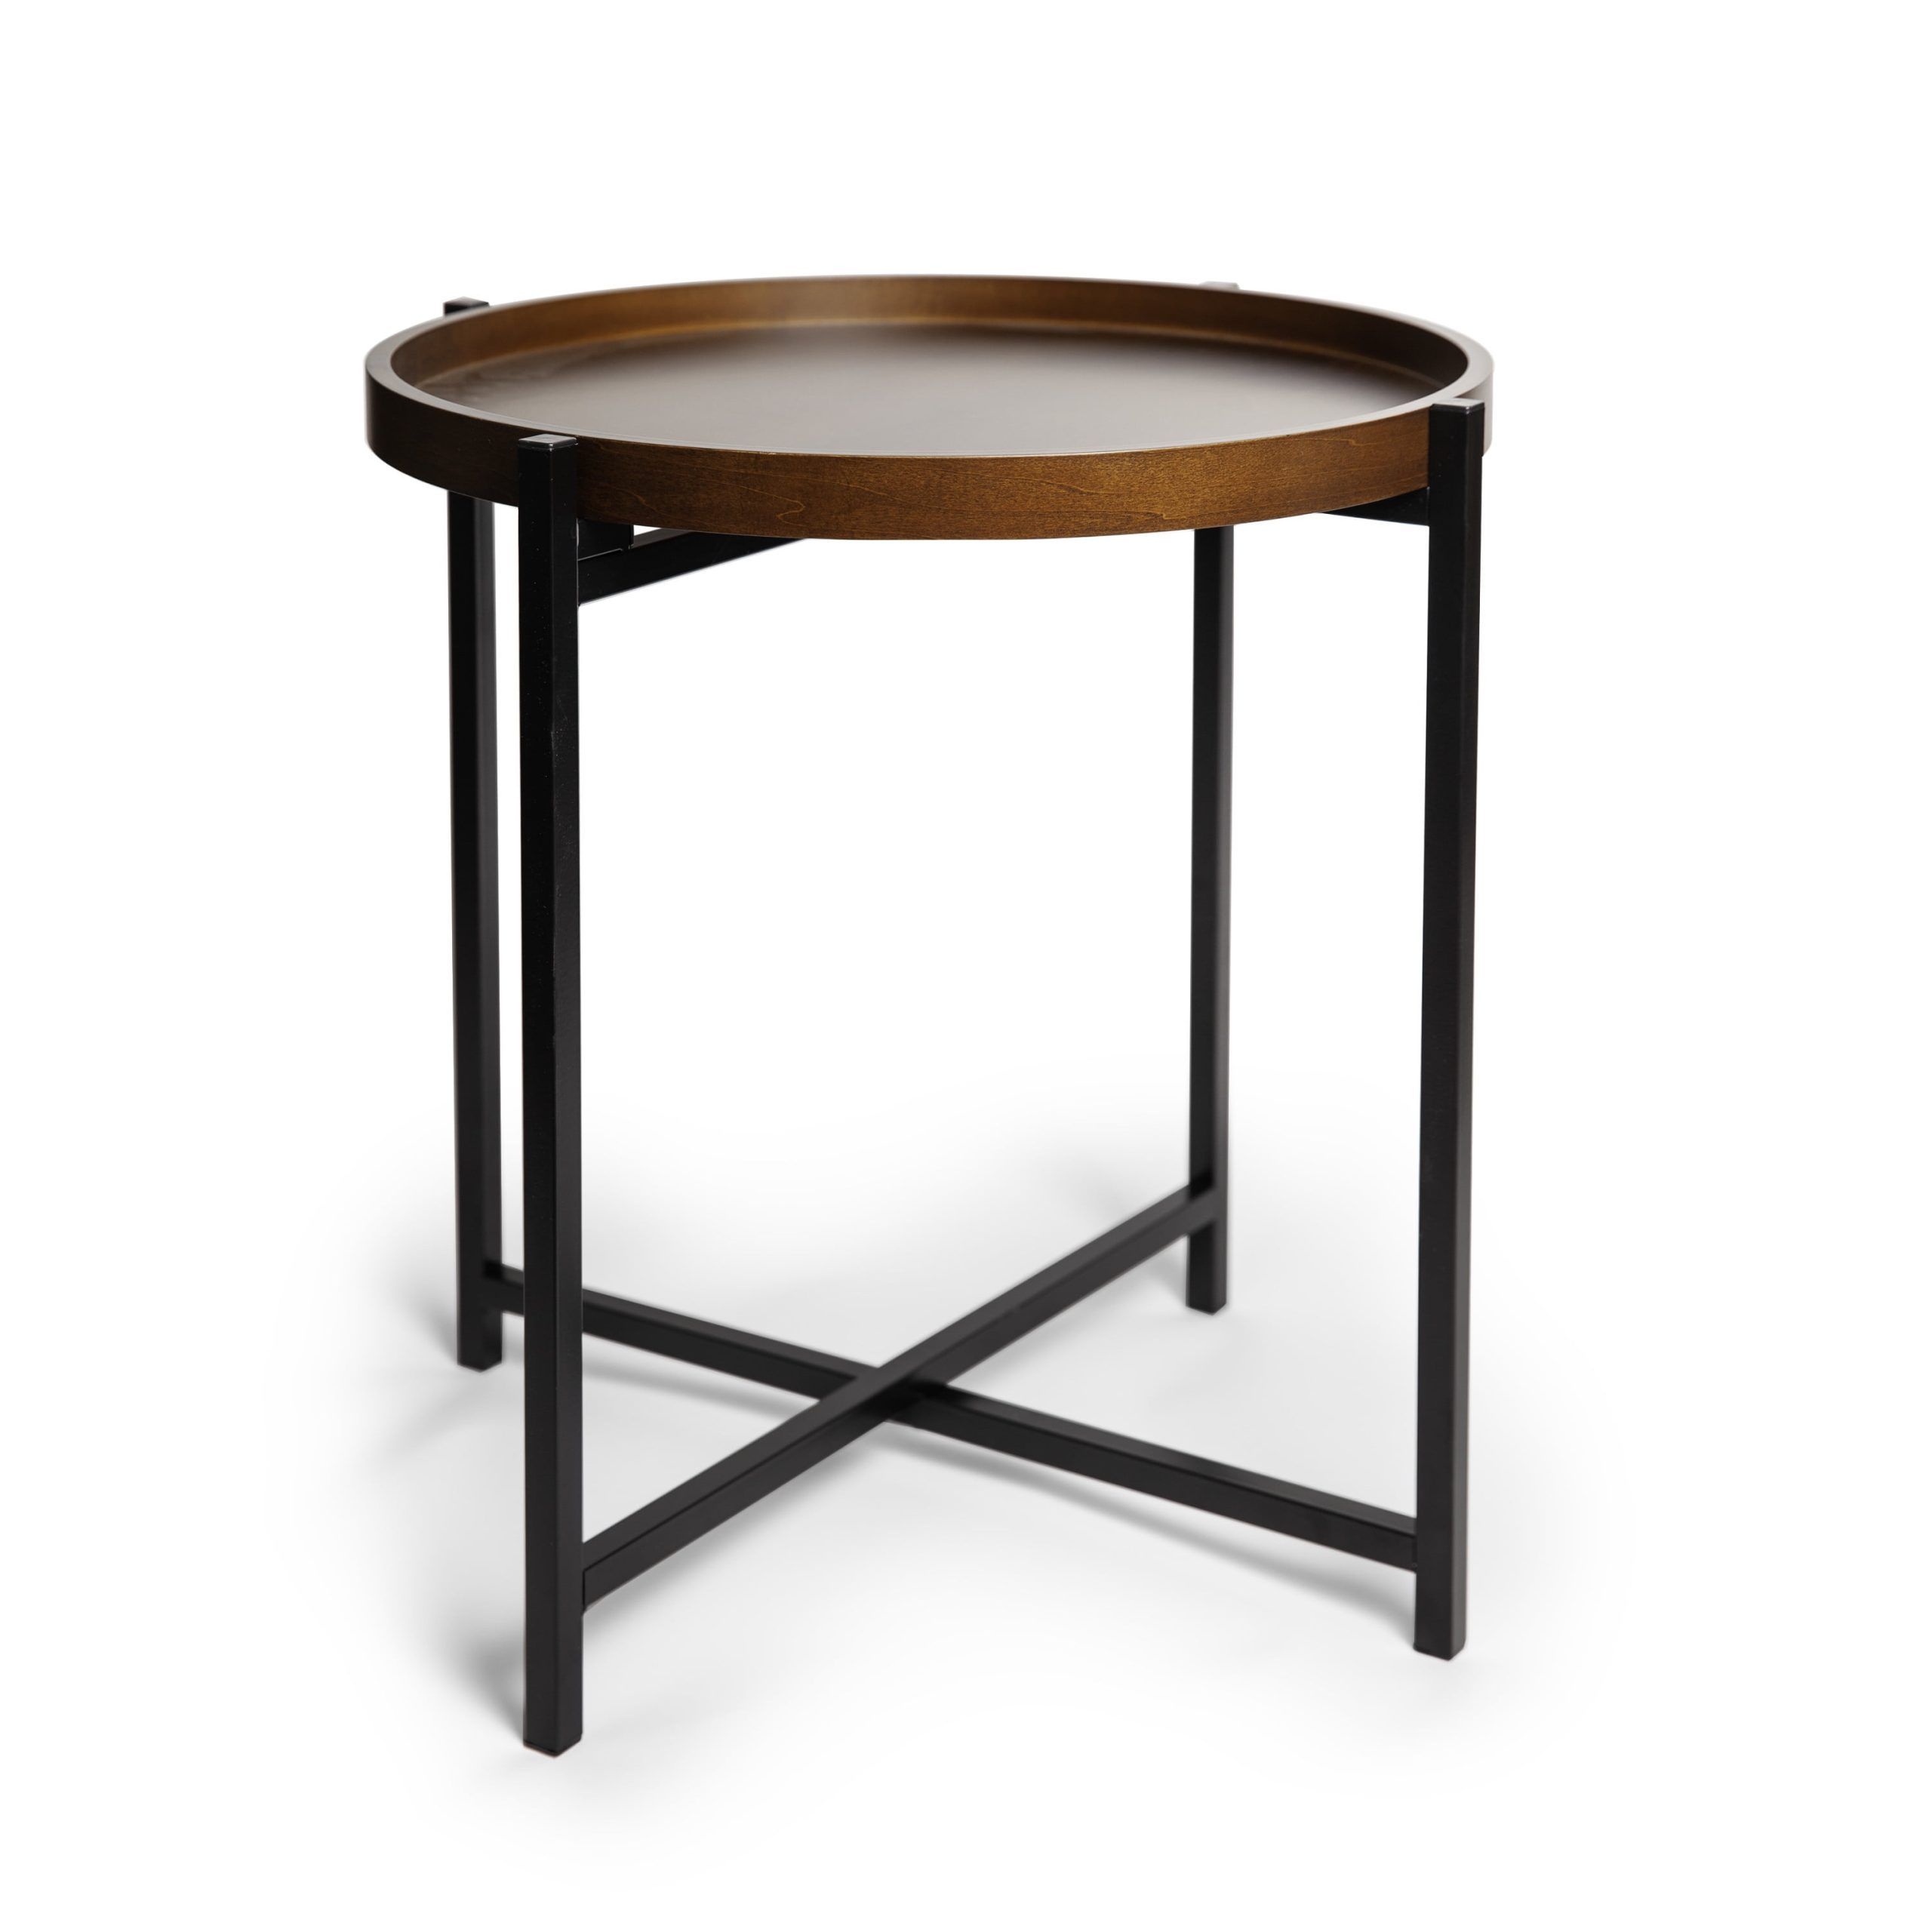 Mid Century Modern Round Side Table With Removable Wood Tray – Walmart With Regard To Detachable Tray Coffee Tables (View 13 of 20)